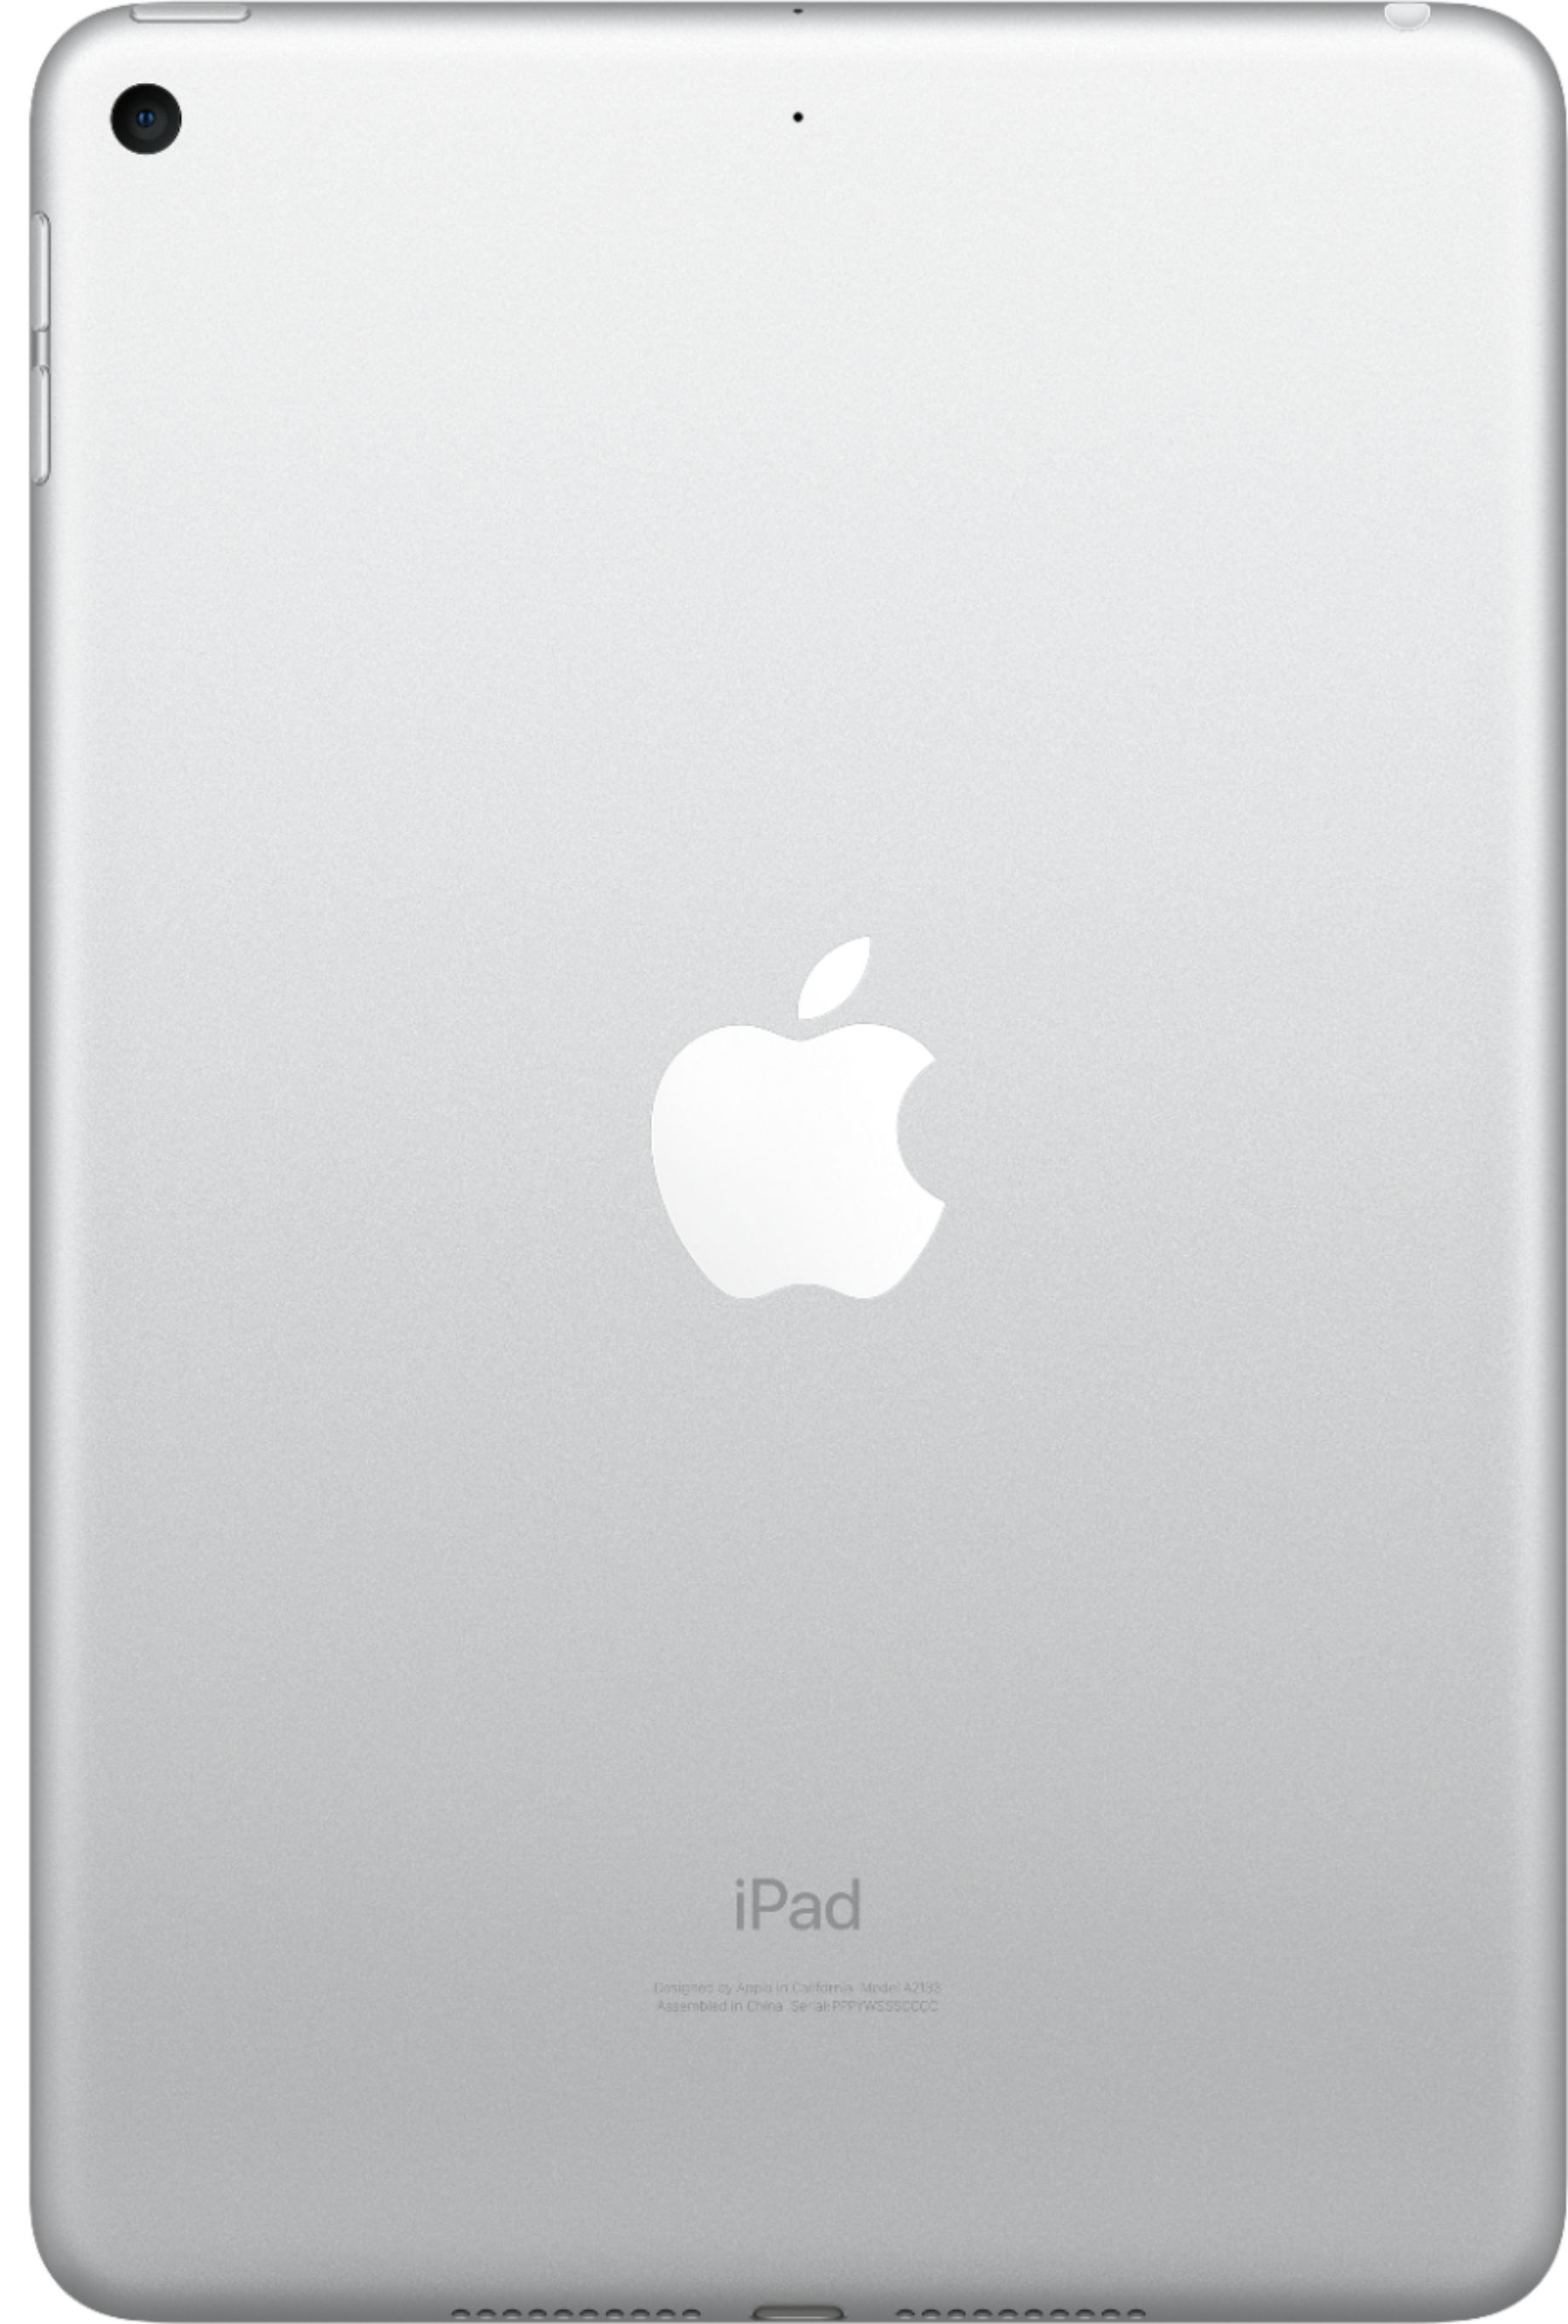 Back View: AppleCare+ for iPad - 2-year plan